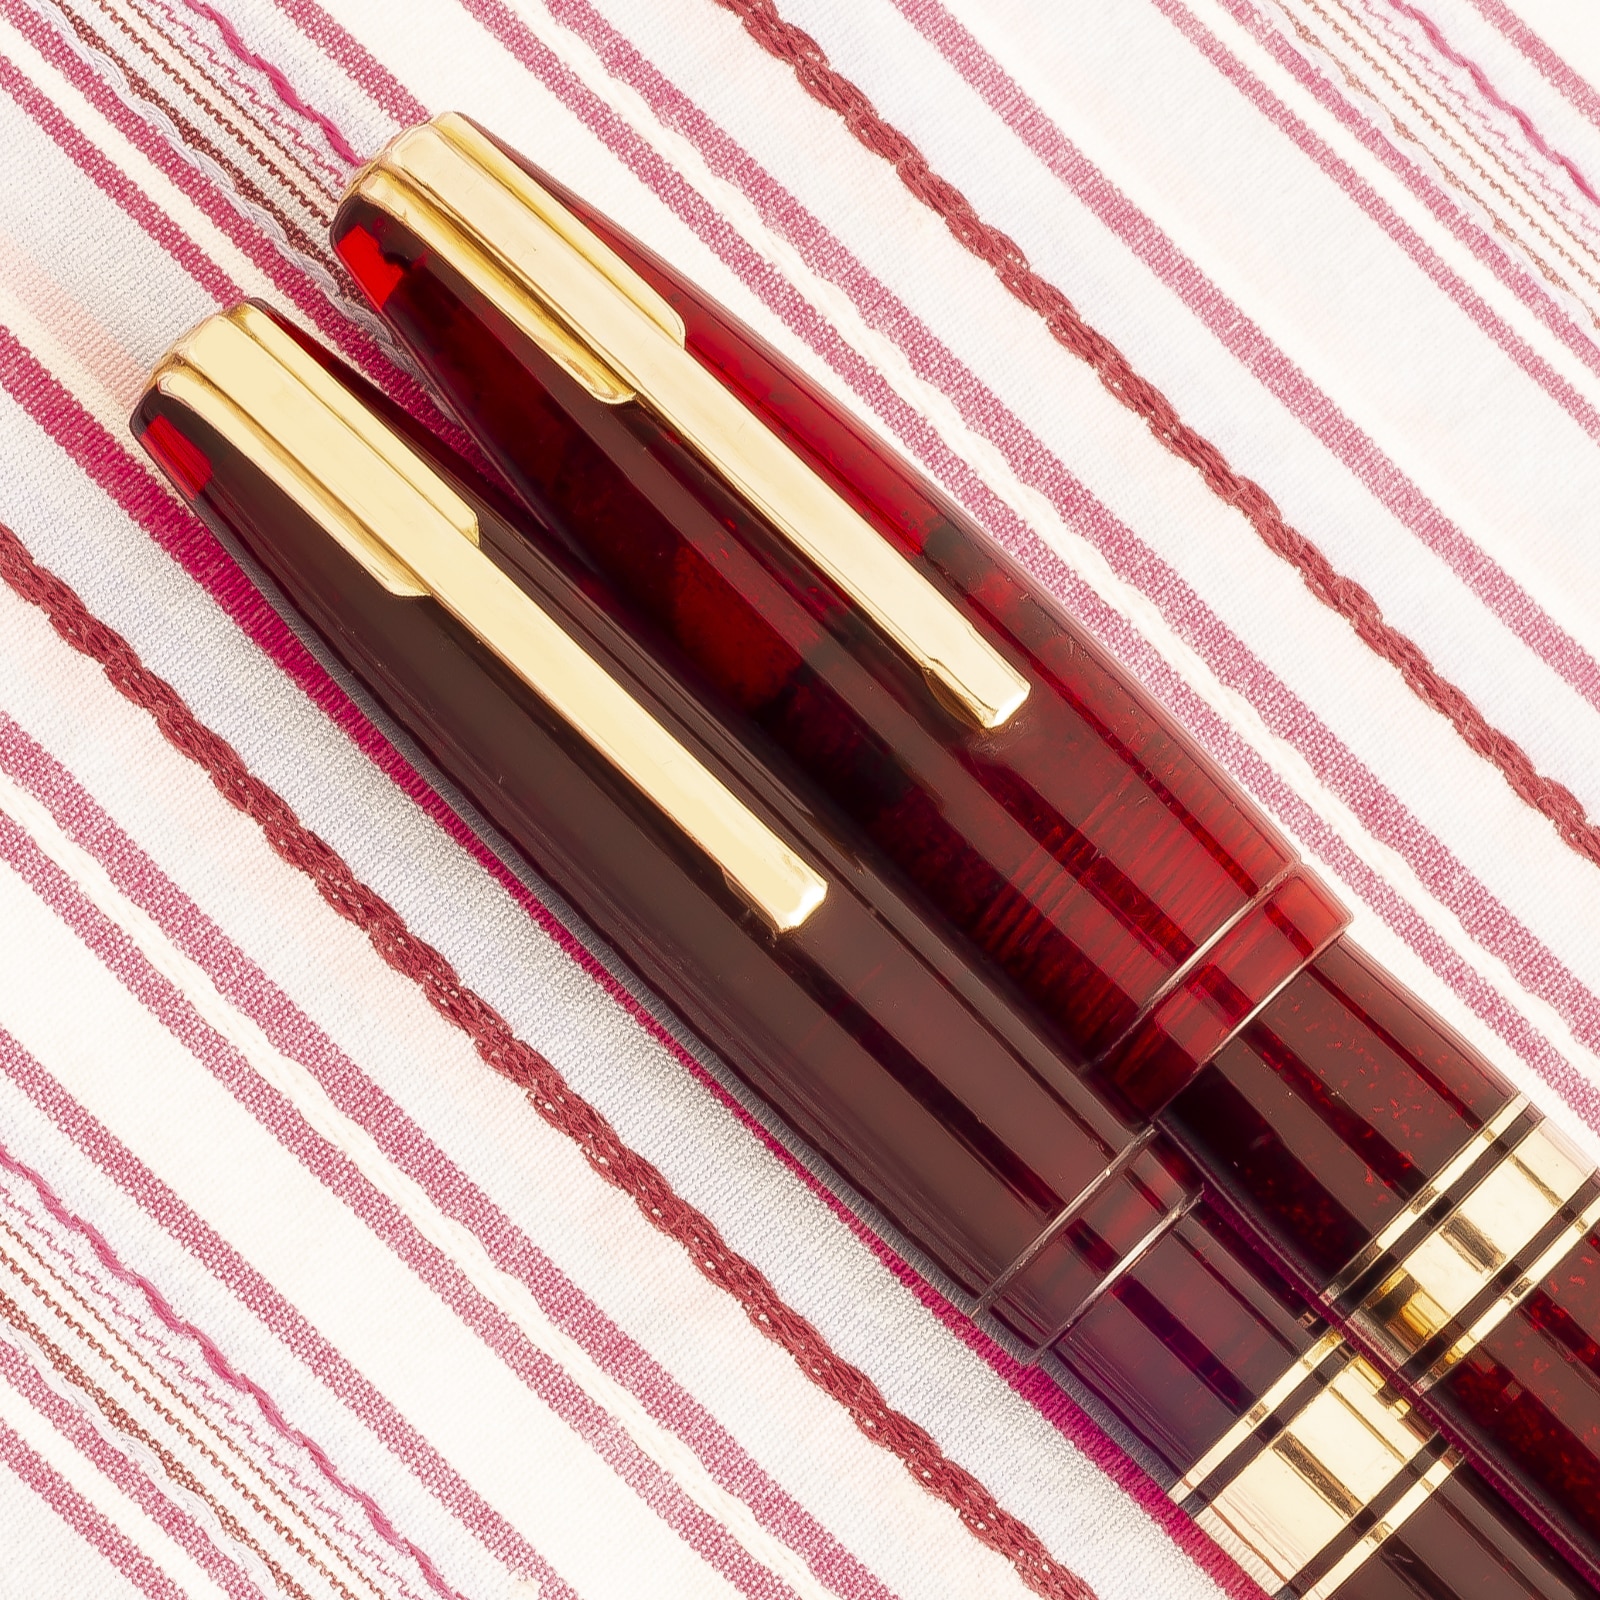 waterman hundred year red jewel lucite fountain pen pencil set